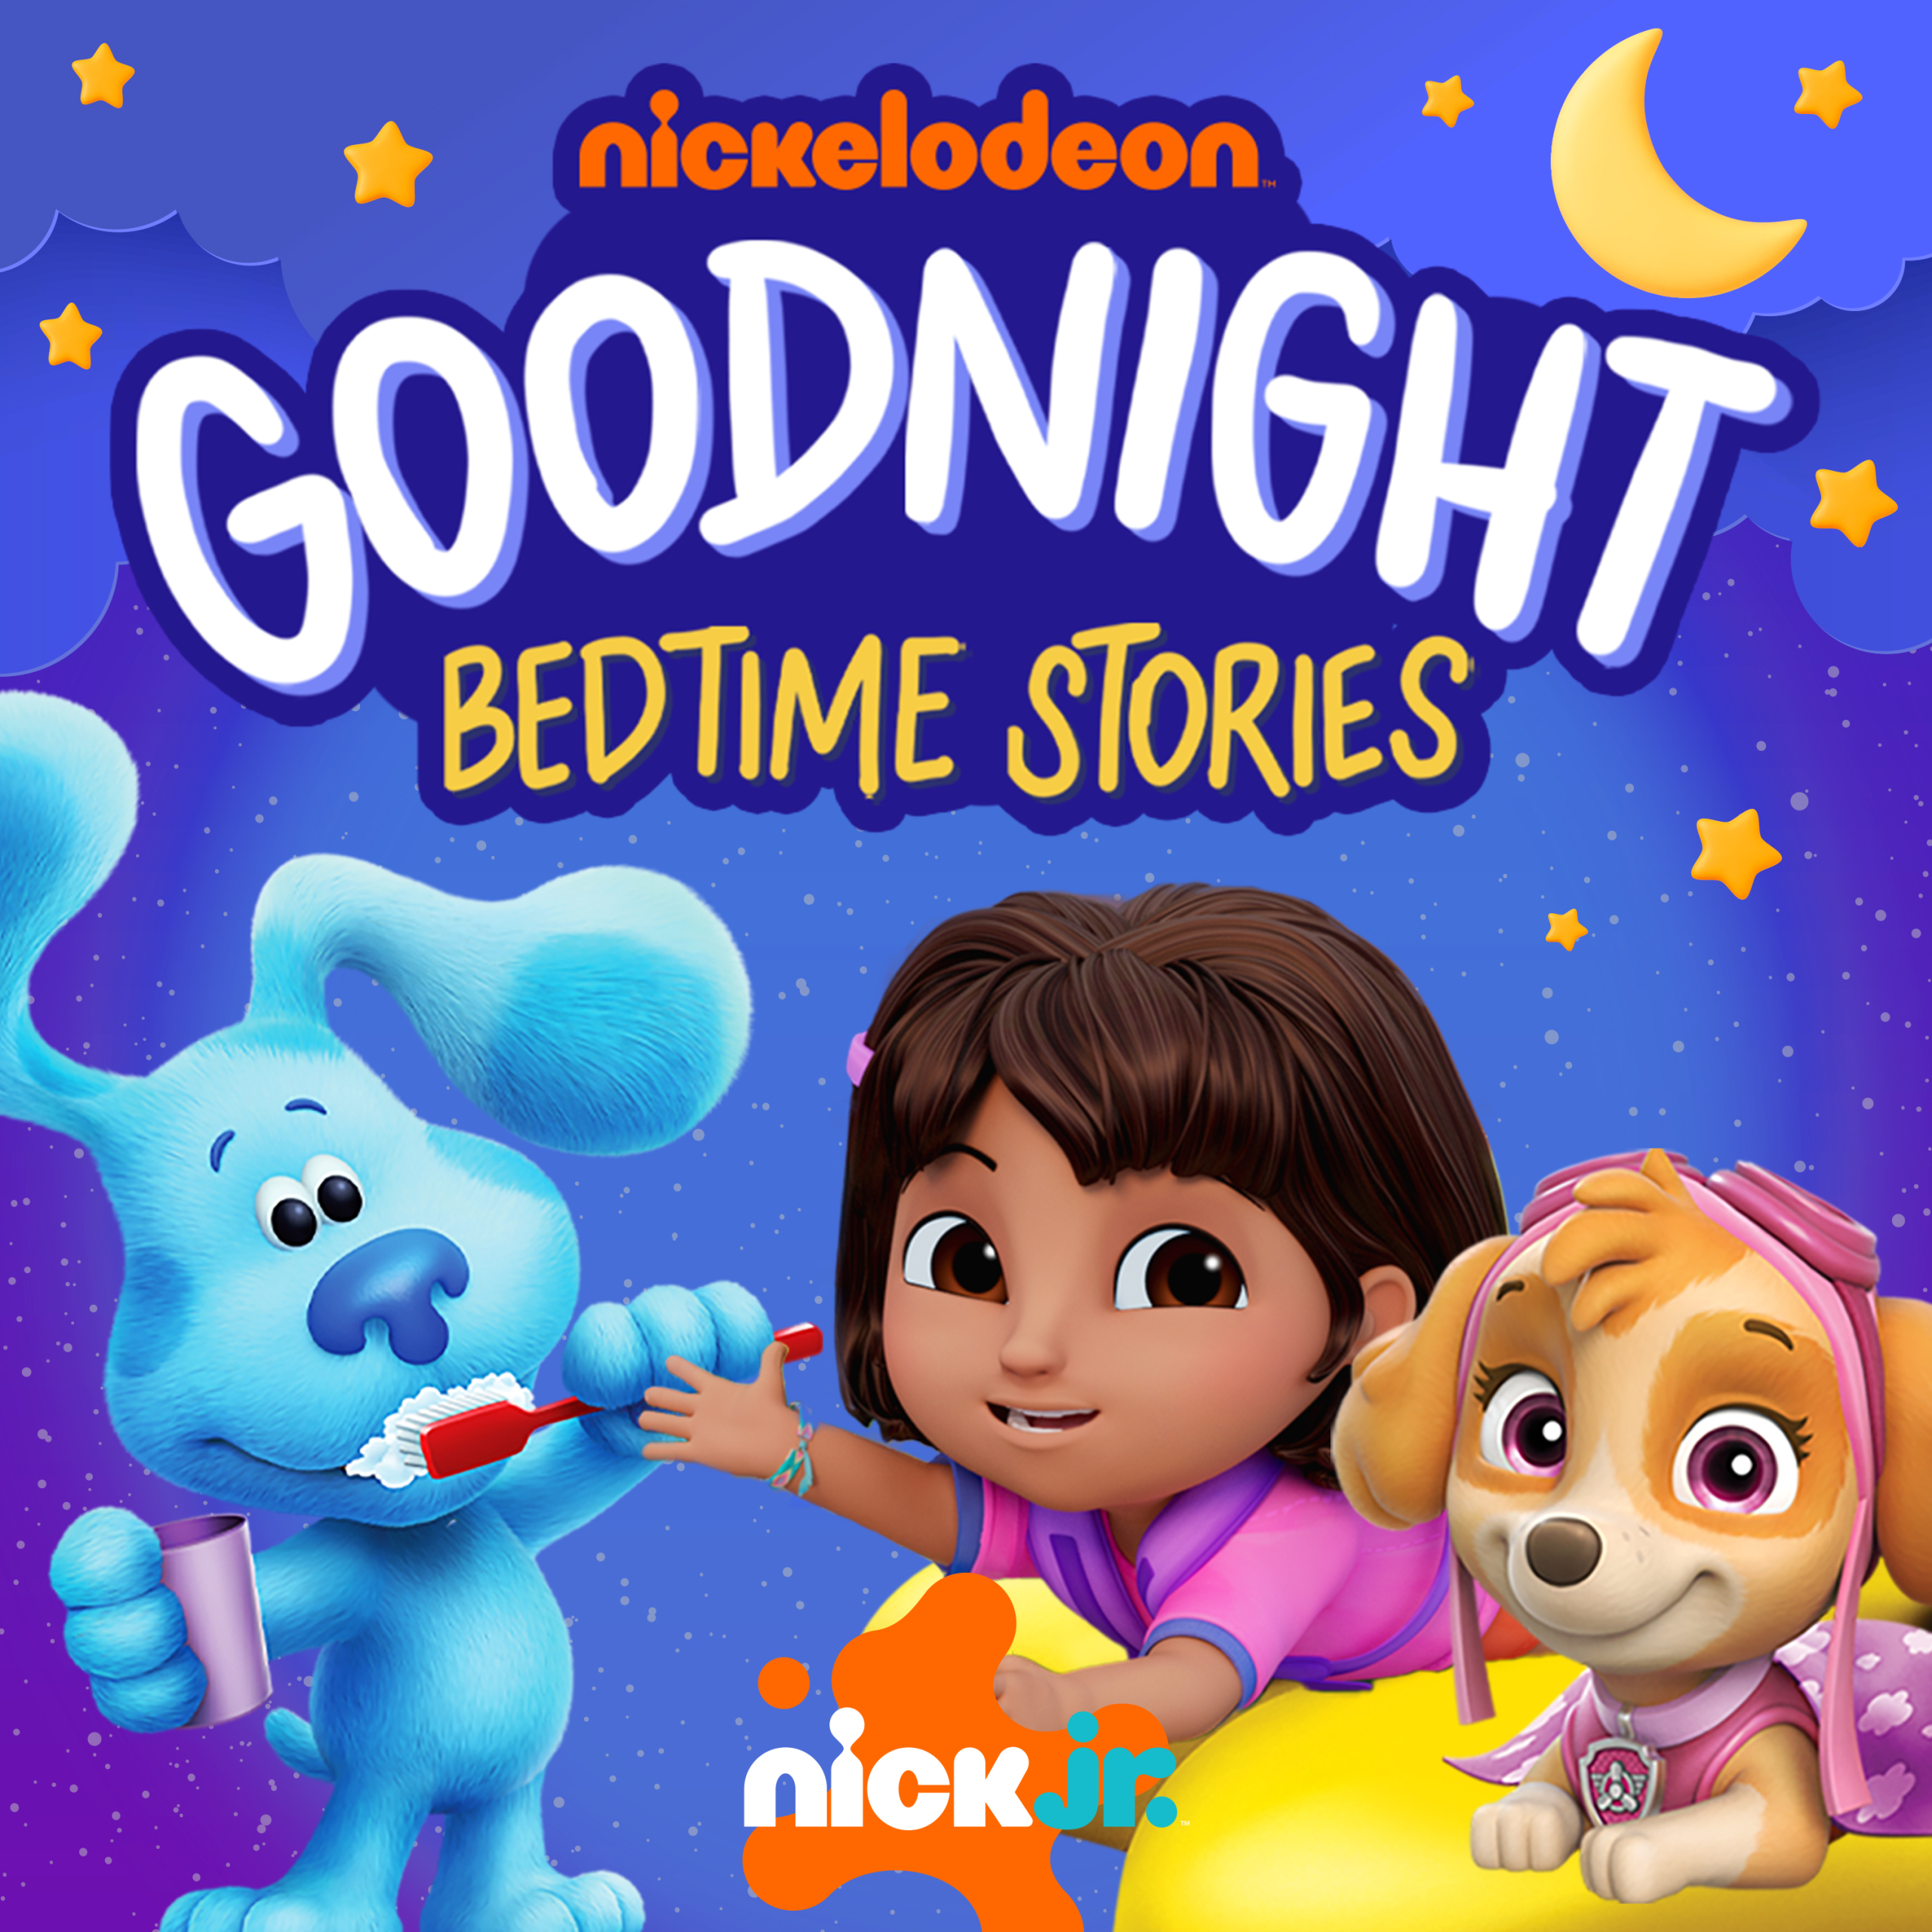 Blue's Clues, Dora, and Skye from PAW Patrol on a starry background in front of Nickelodeon Goodnight Bedtime Stories podcast logo